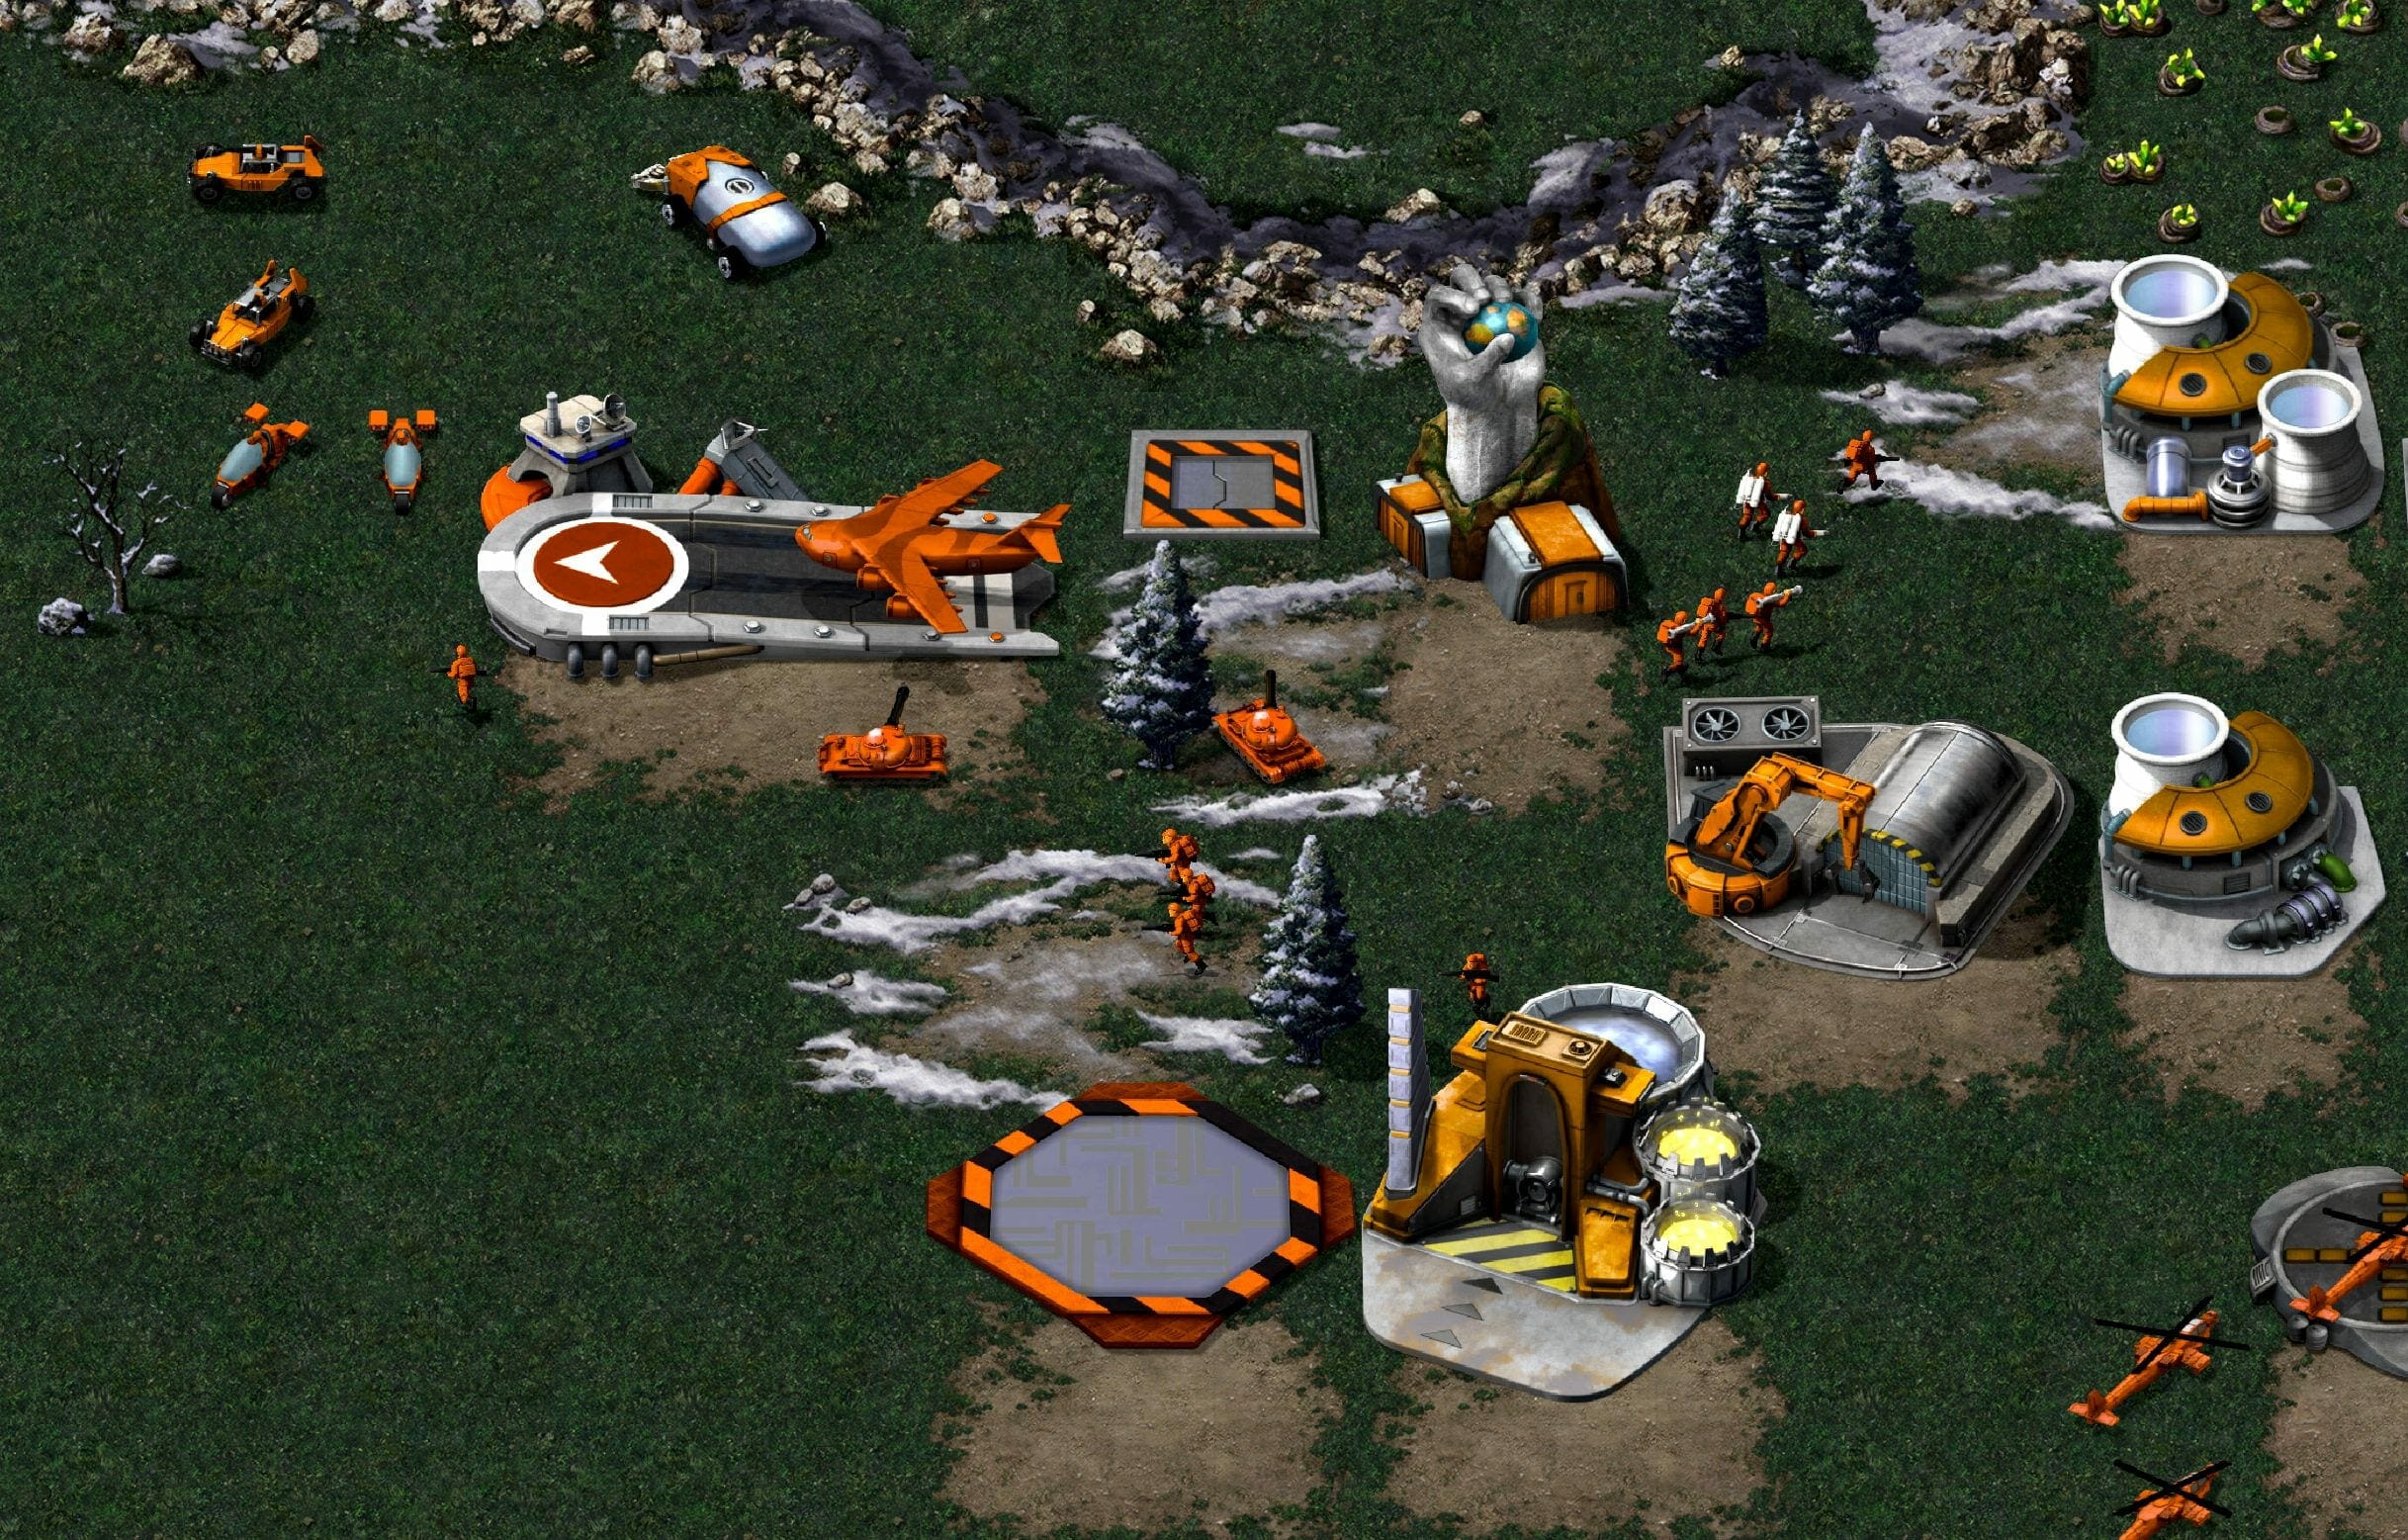 Install Mods In Command & Conquer Remastered On Steam